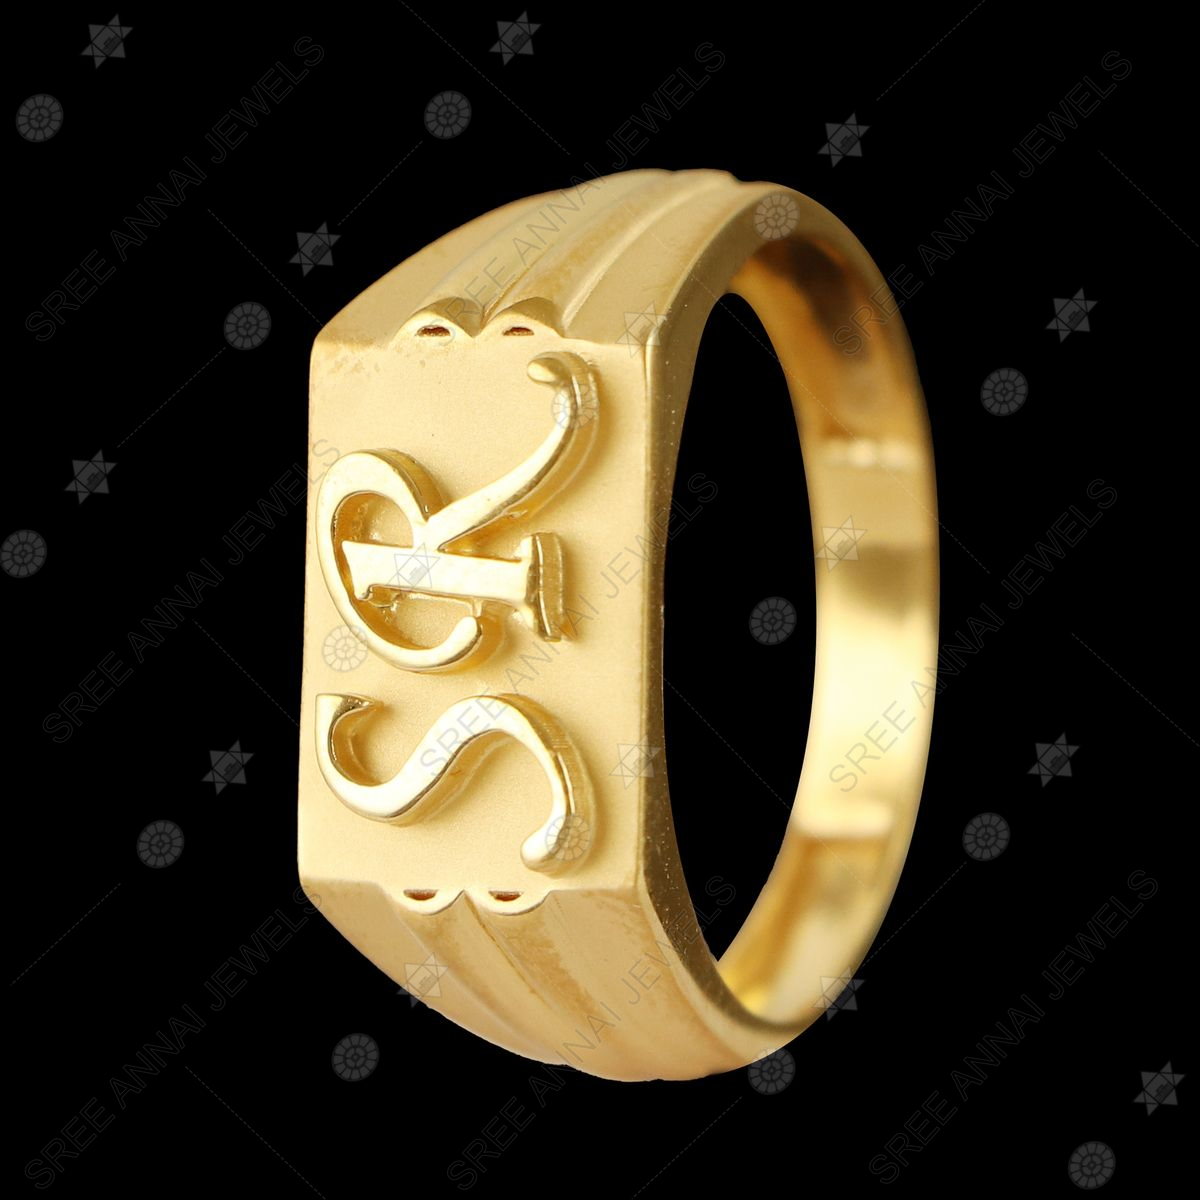 Golden Colour With White Rhinestone And Leaf Design Ring For Women